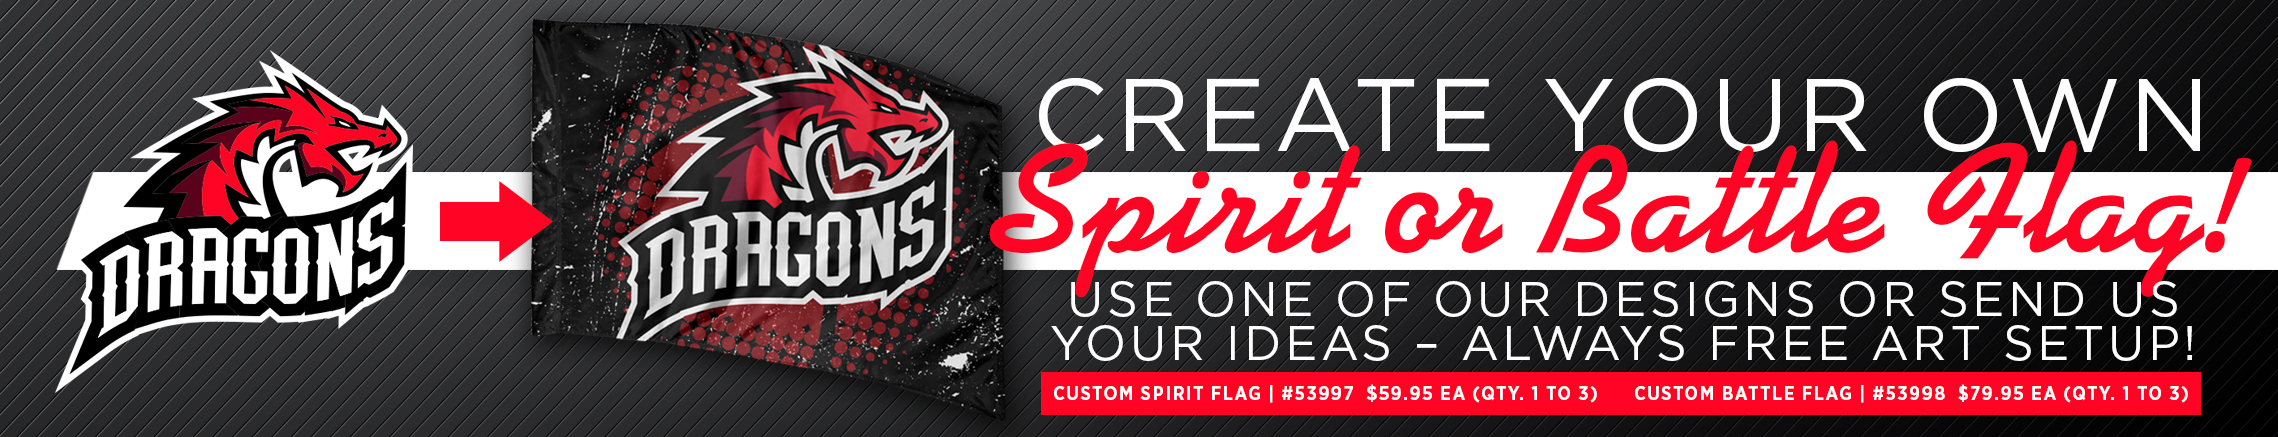 Create your own Spirit or Battle Flags! Use one of our designs or send us your ideas. Always free art setup.